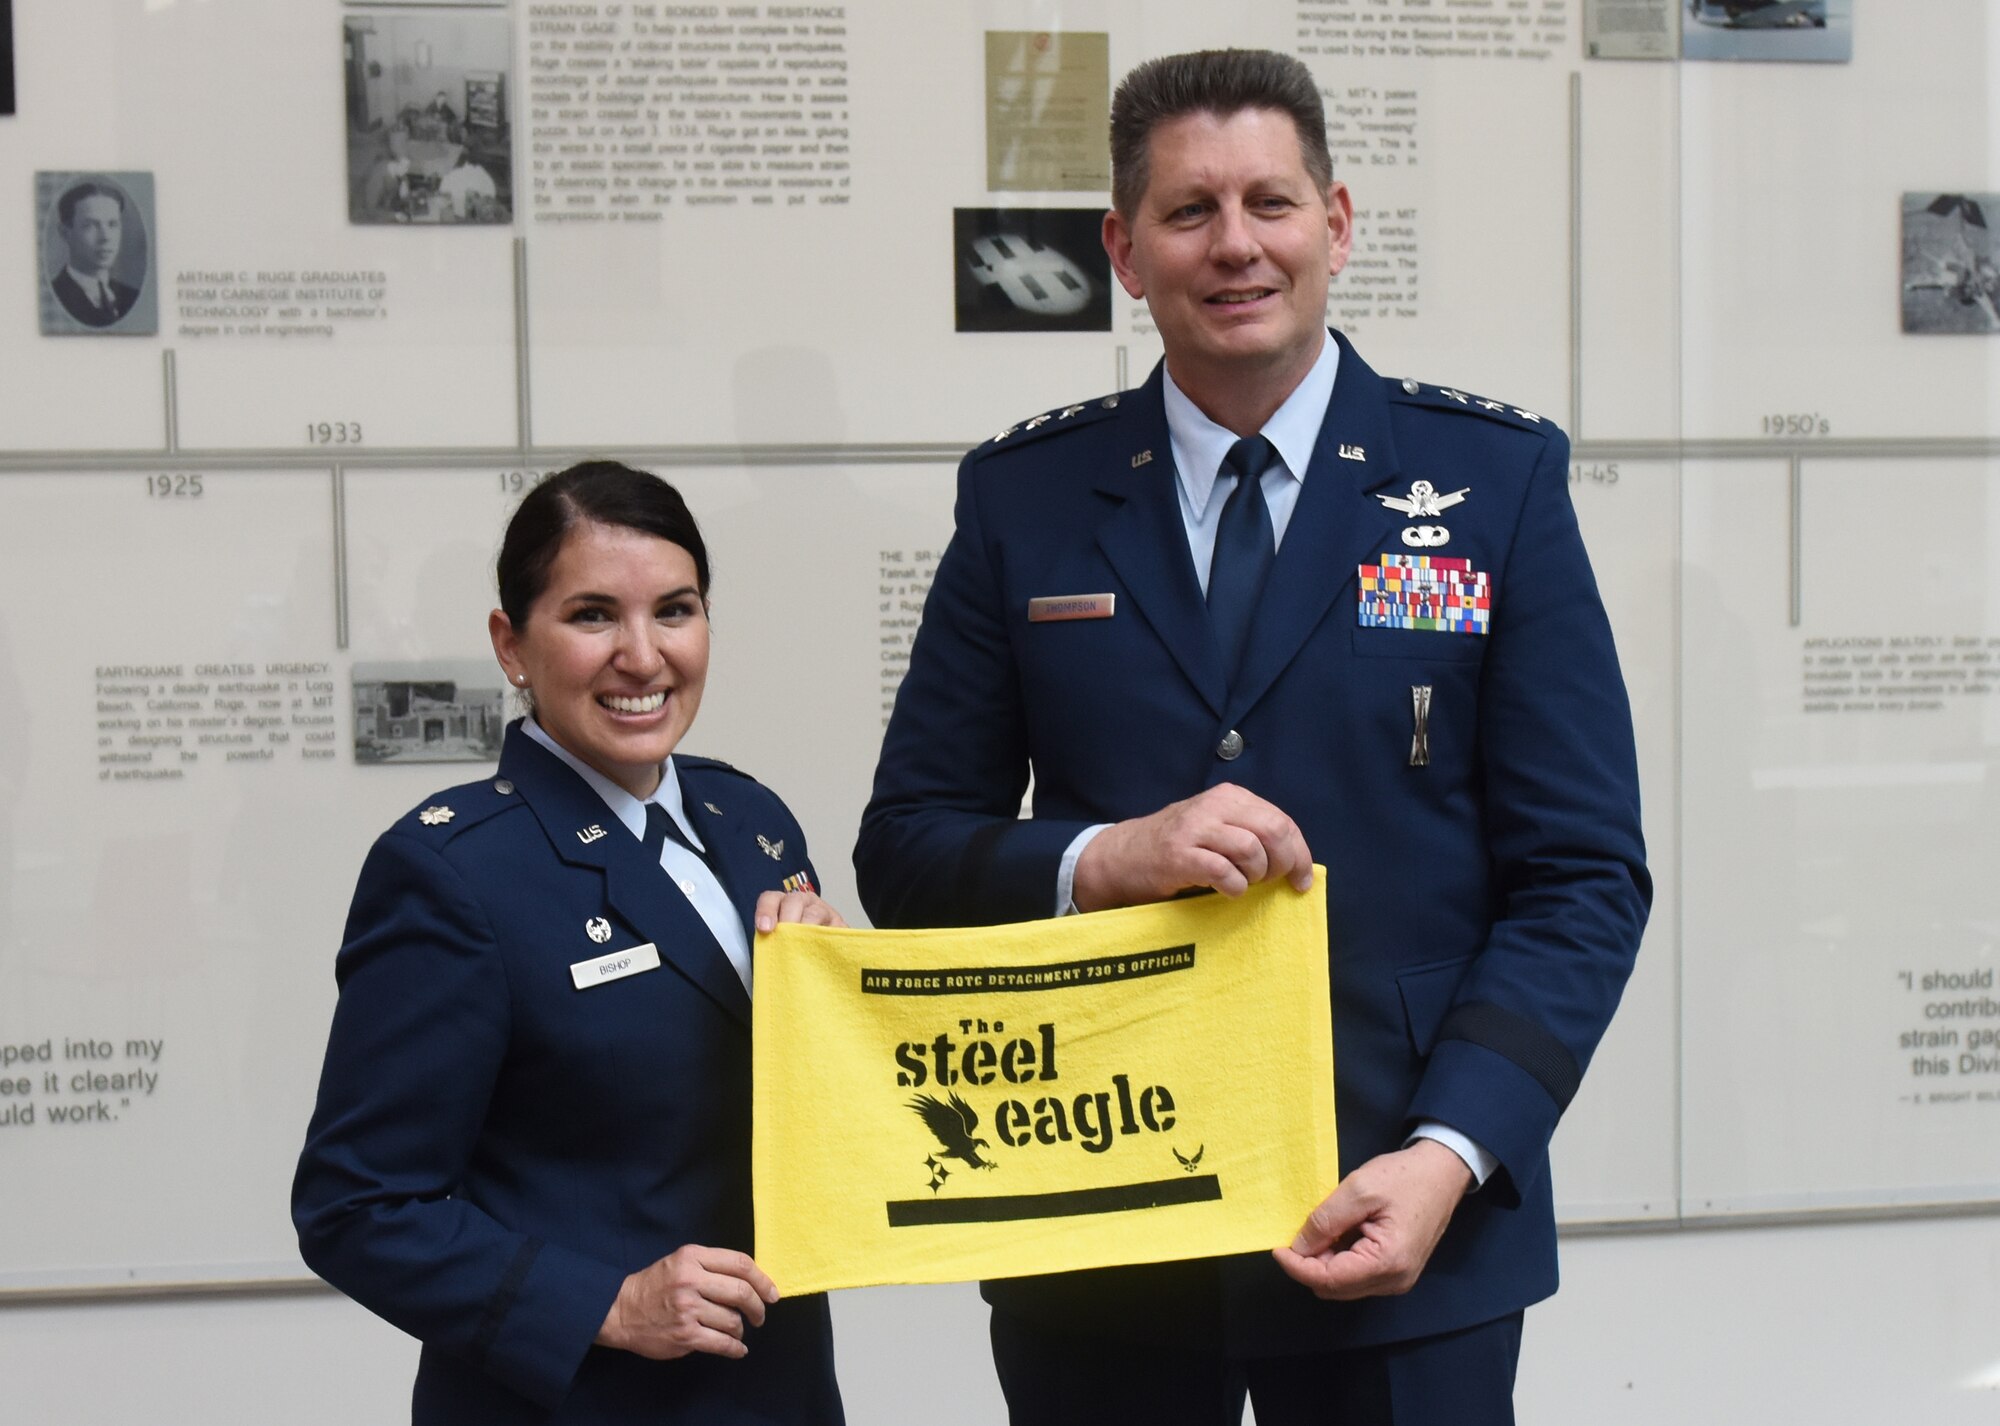 Lt. Col. Diana Bishop, commander of Air Force ROTC Detachment 730, presents a gift to Air Force Space Command Vice Commander Lt. Gen. David Thompson in Pittsburgh, June 14, 2019.